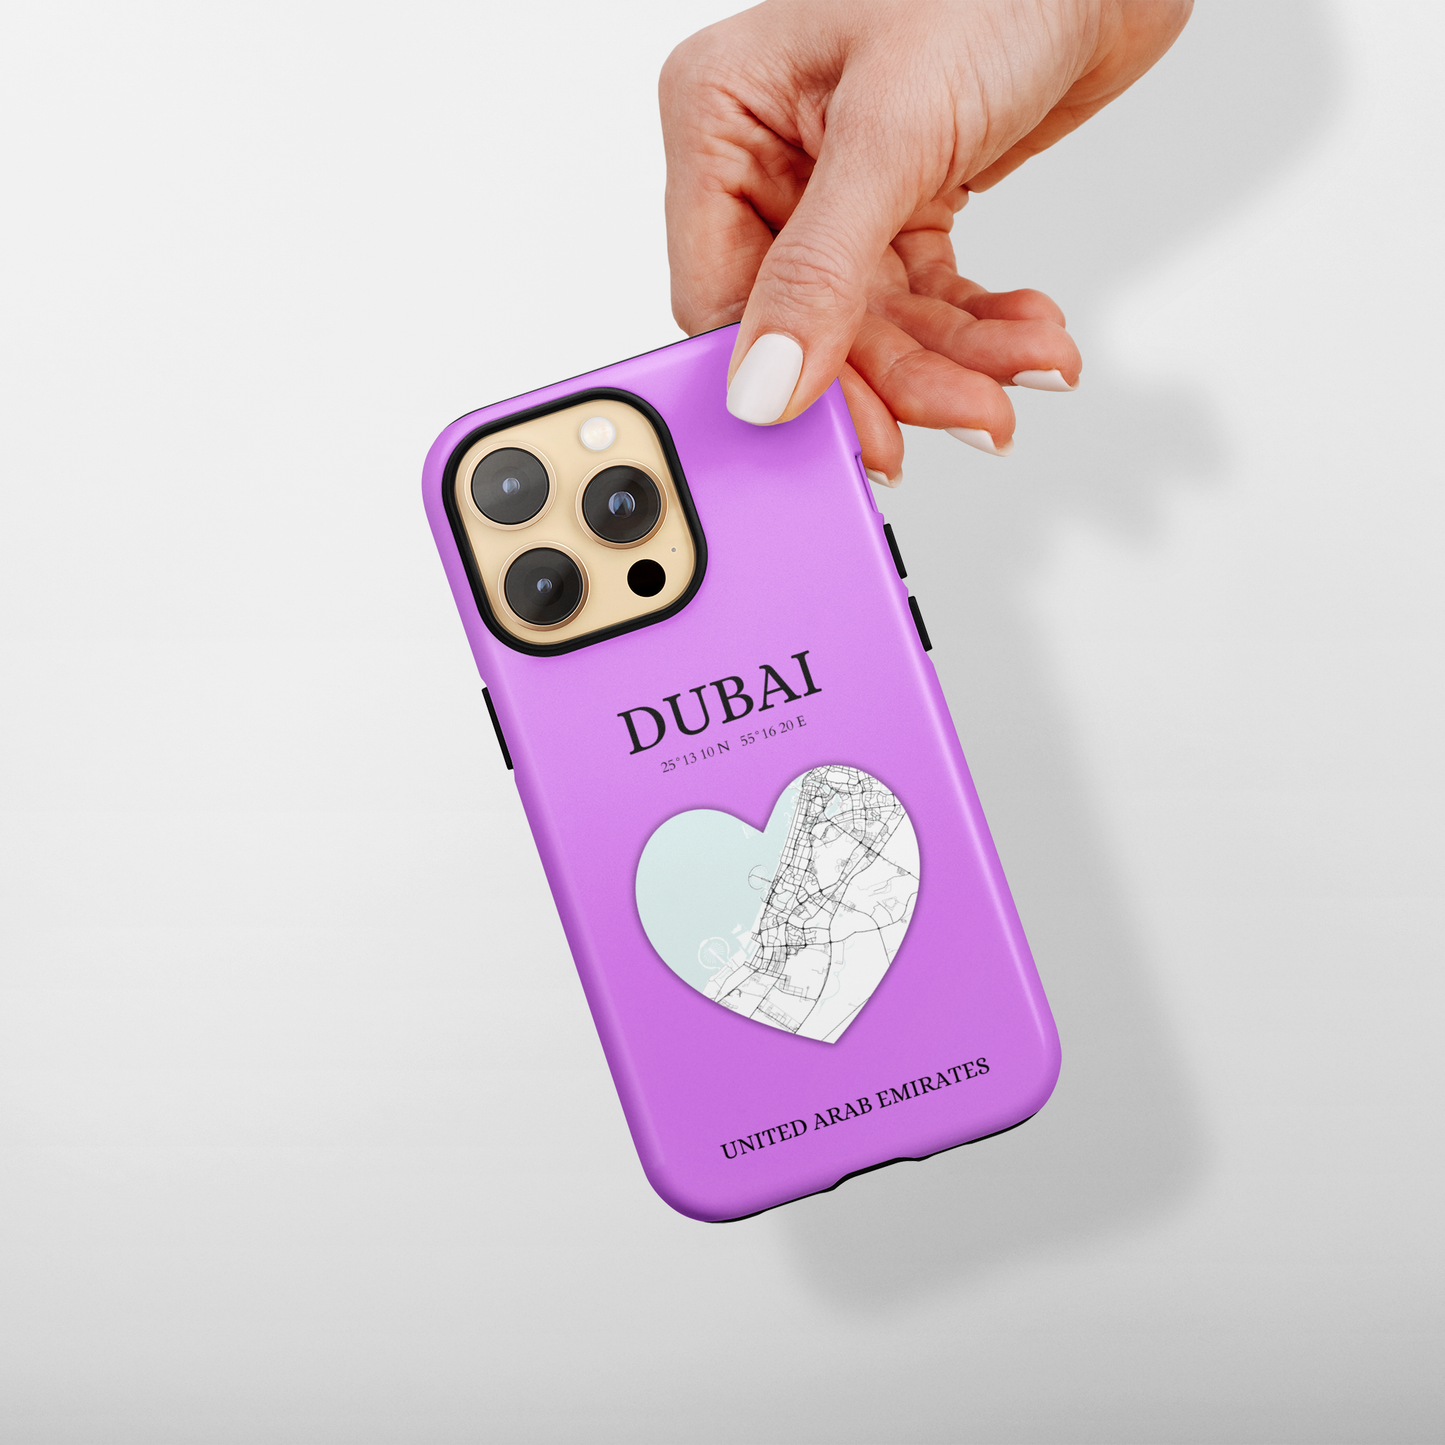 Dubai Heartbeat - Purple (iPhone MagSafe Case)Elevate your iPhone's style with the Dubai Heartbeat Purple MagSafe Case, offering robust protection, MagSafe compatibility, and a choice of matte or glossy finish. RimaGallery